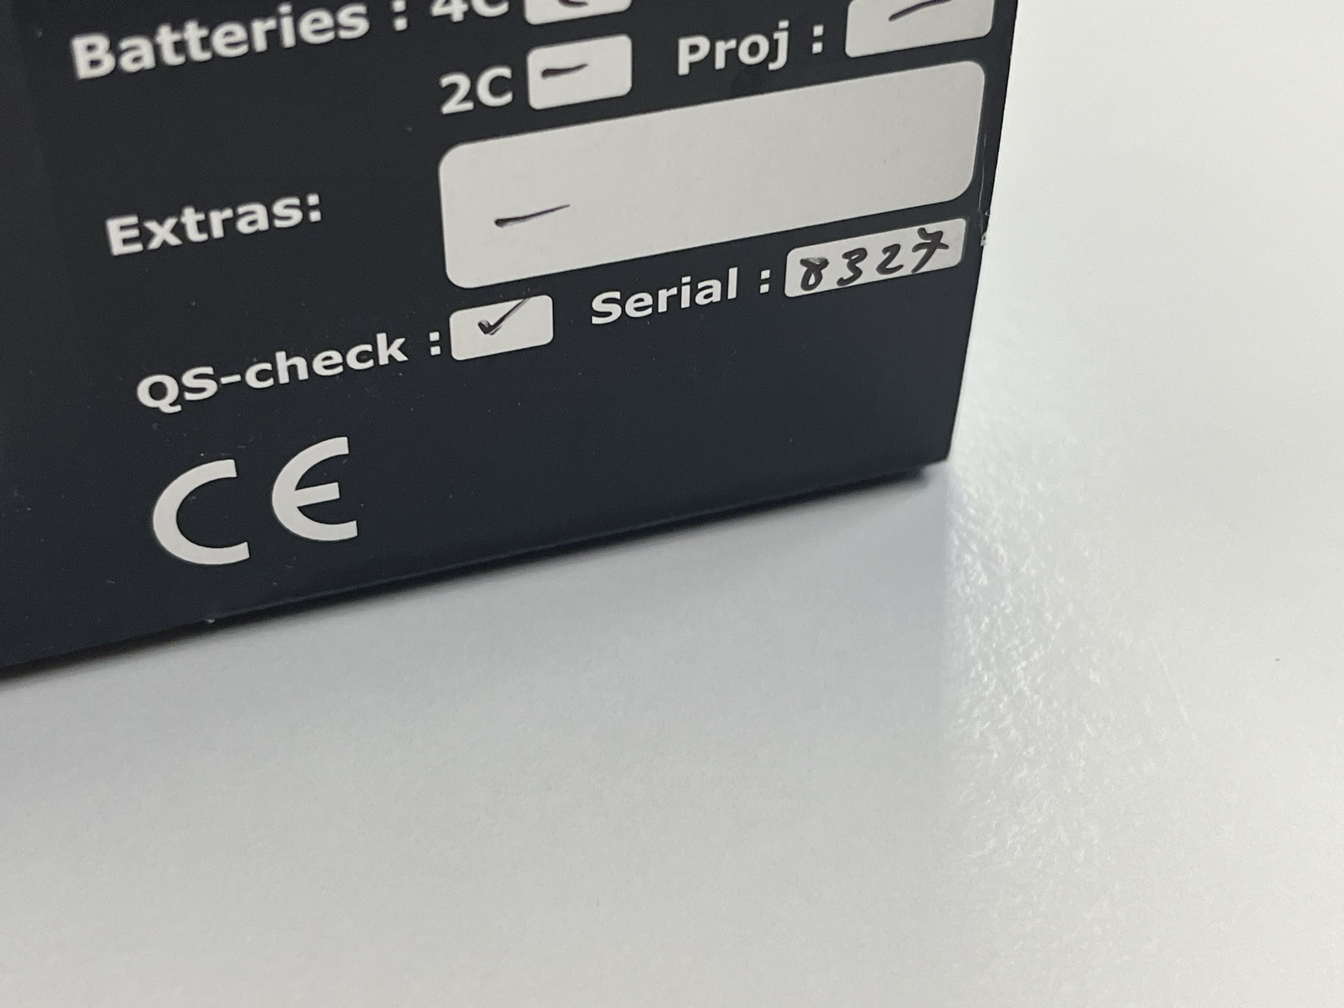 Serial numbers on the Scurion boxes